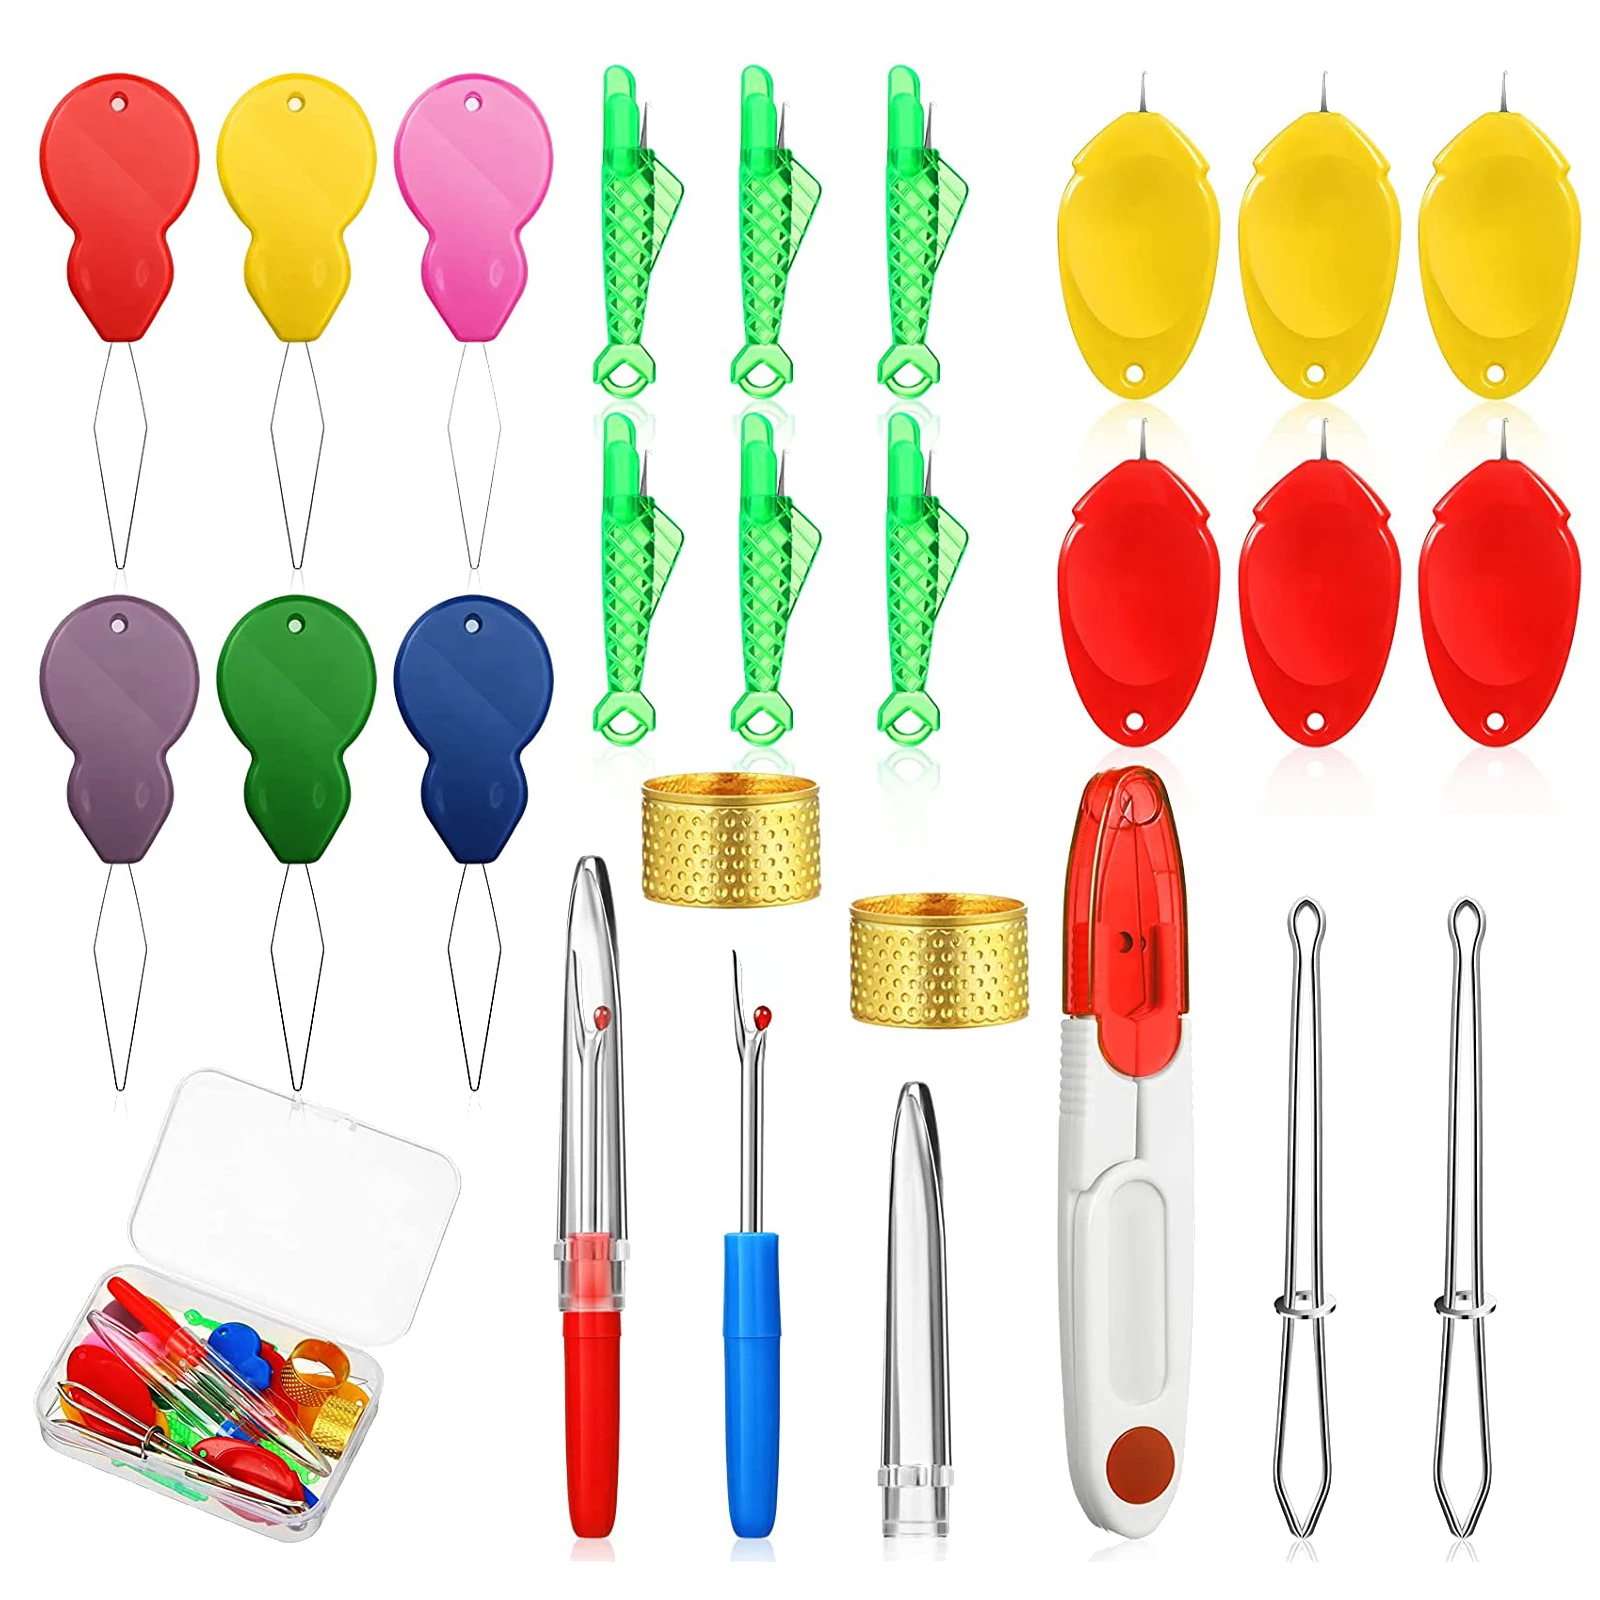  Needle Threaders for Hand Sewing,25 Pcs Needle Threaders  Kit,Include Fish Type Easy Threader/Gourd Shaped Sewing Needle  Threader/Thumb Shaped Threaders/Seam Rippers/Sewing  Tweezers/Thimble/Scissor etc